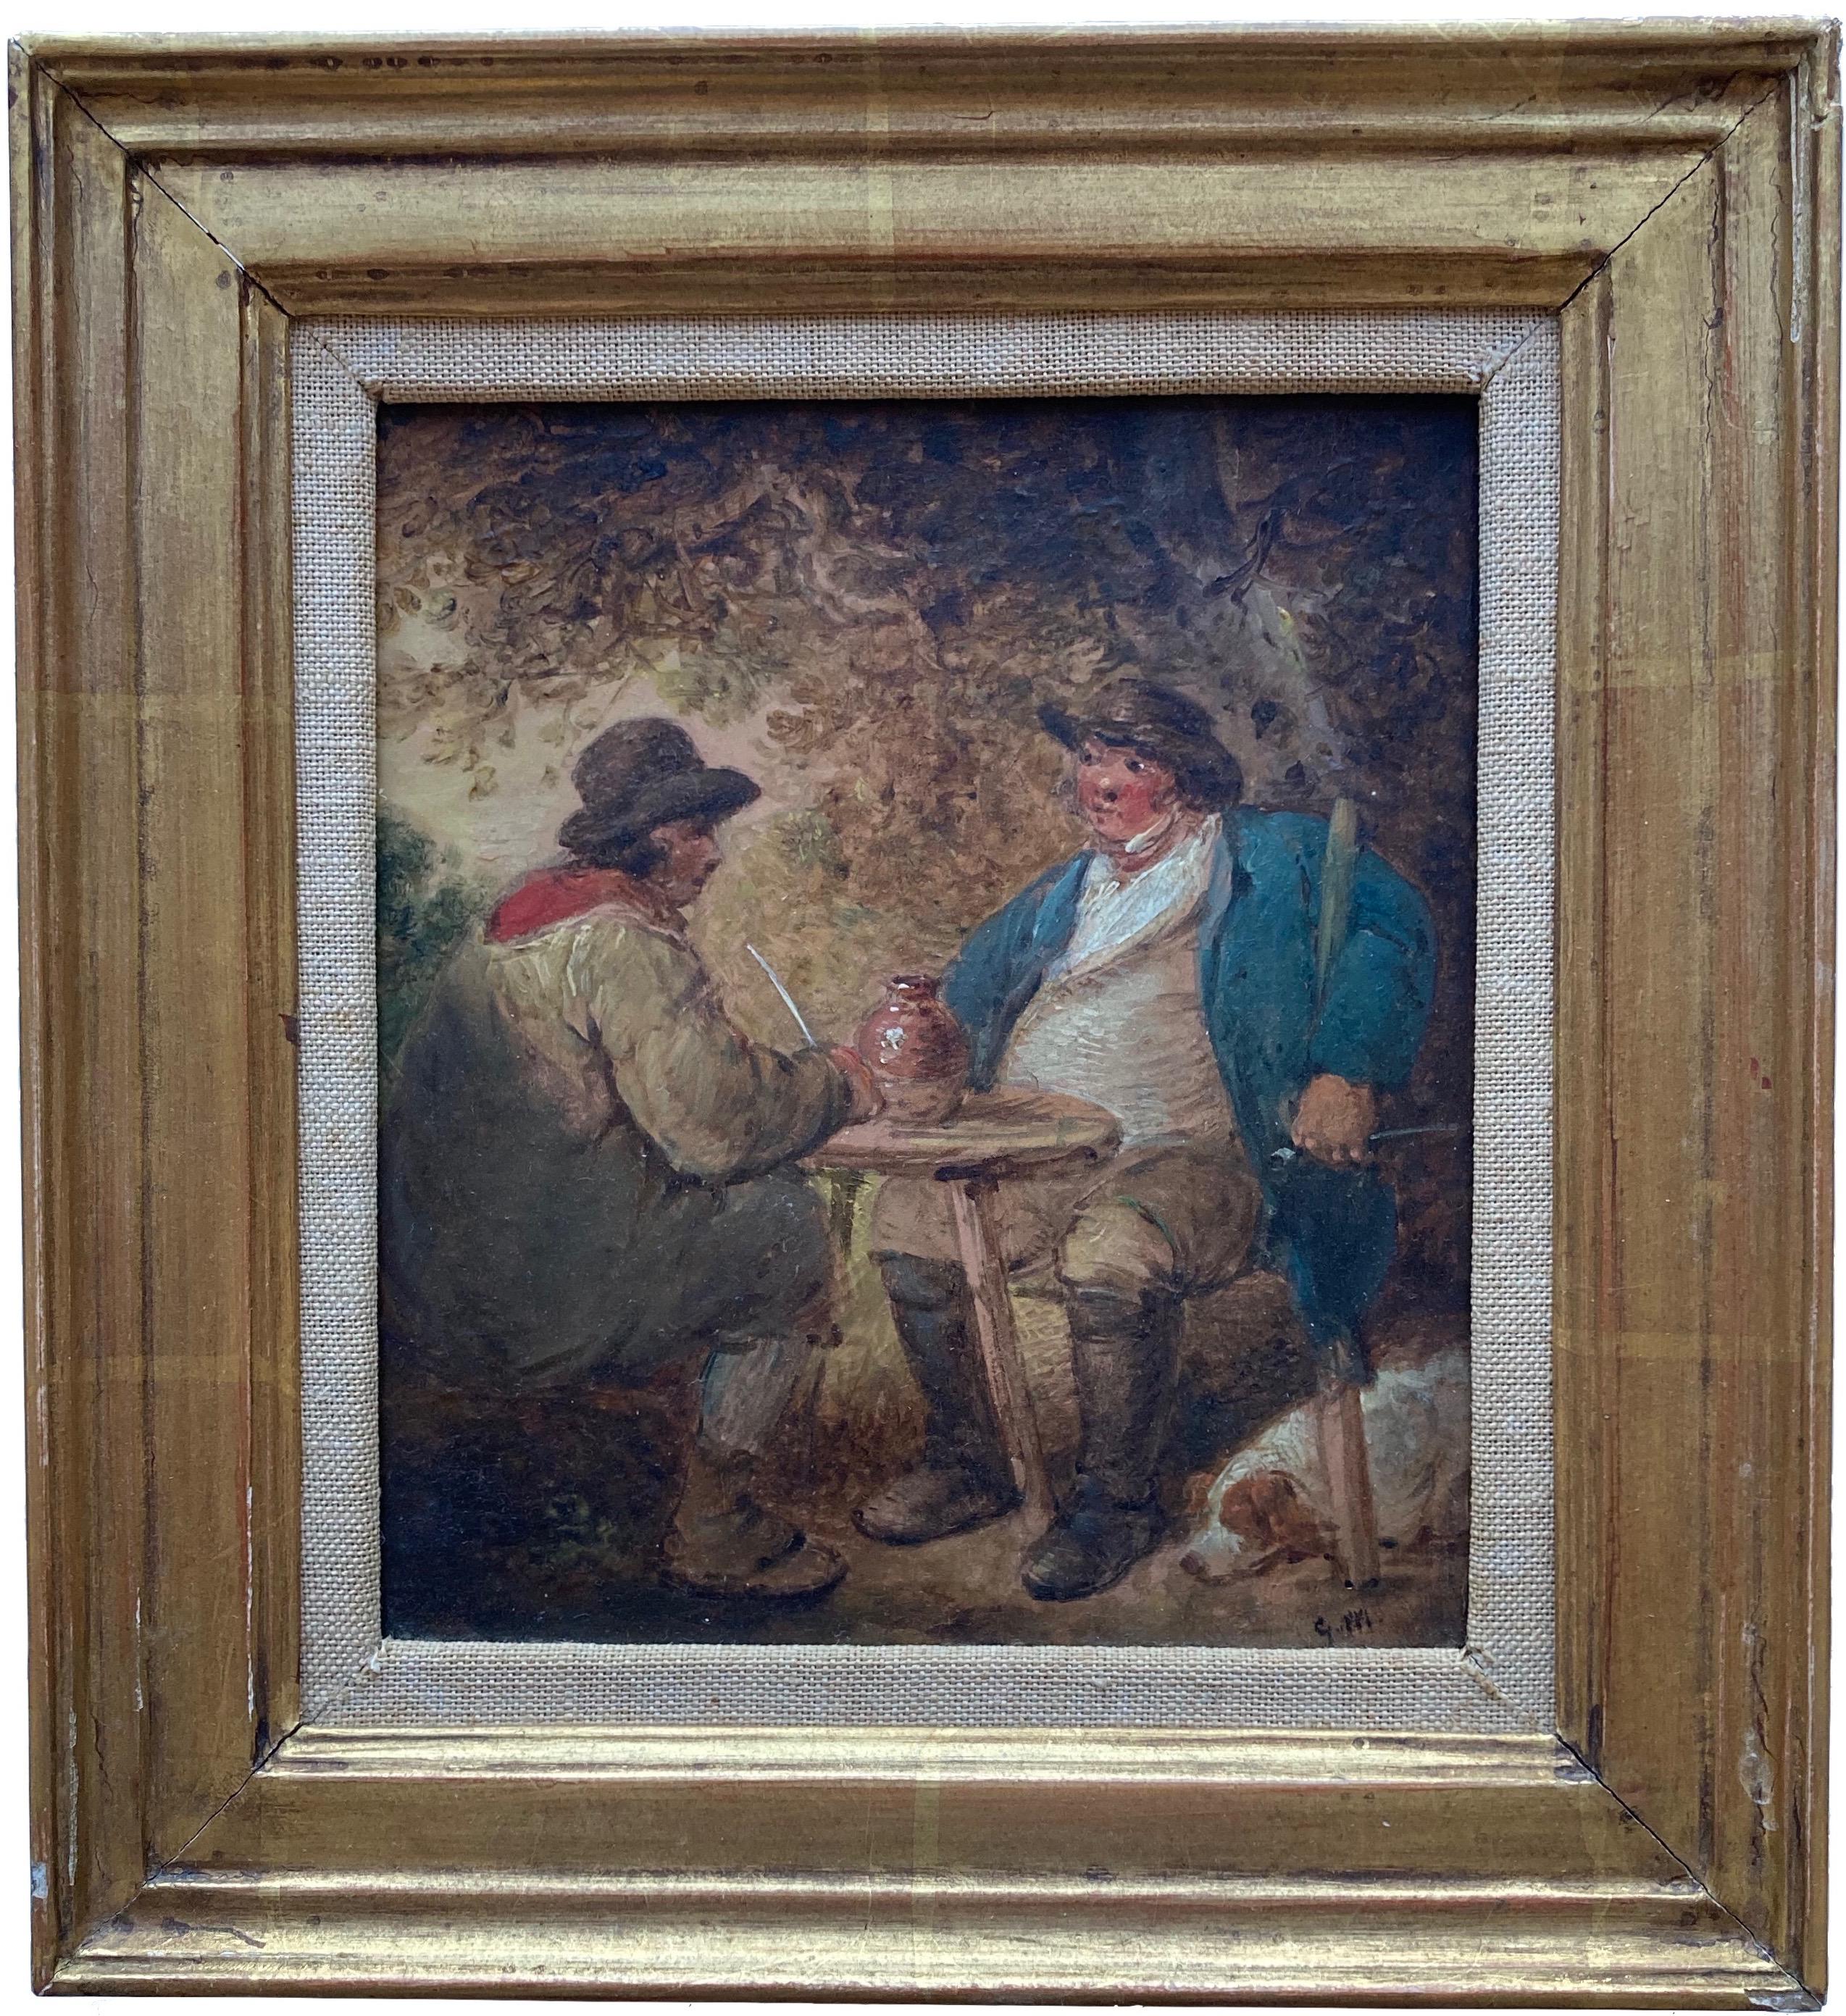 A charming rustic scene with figures drinking outside a tavern. Painted on a lovely old oak panel with labels and a wax seal.

George Morland (1763-1804)
Figures outside an Inn 
Oil on panel
With seal and labels to the reverse
7 x 6 inches
10 x 9